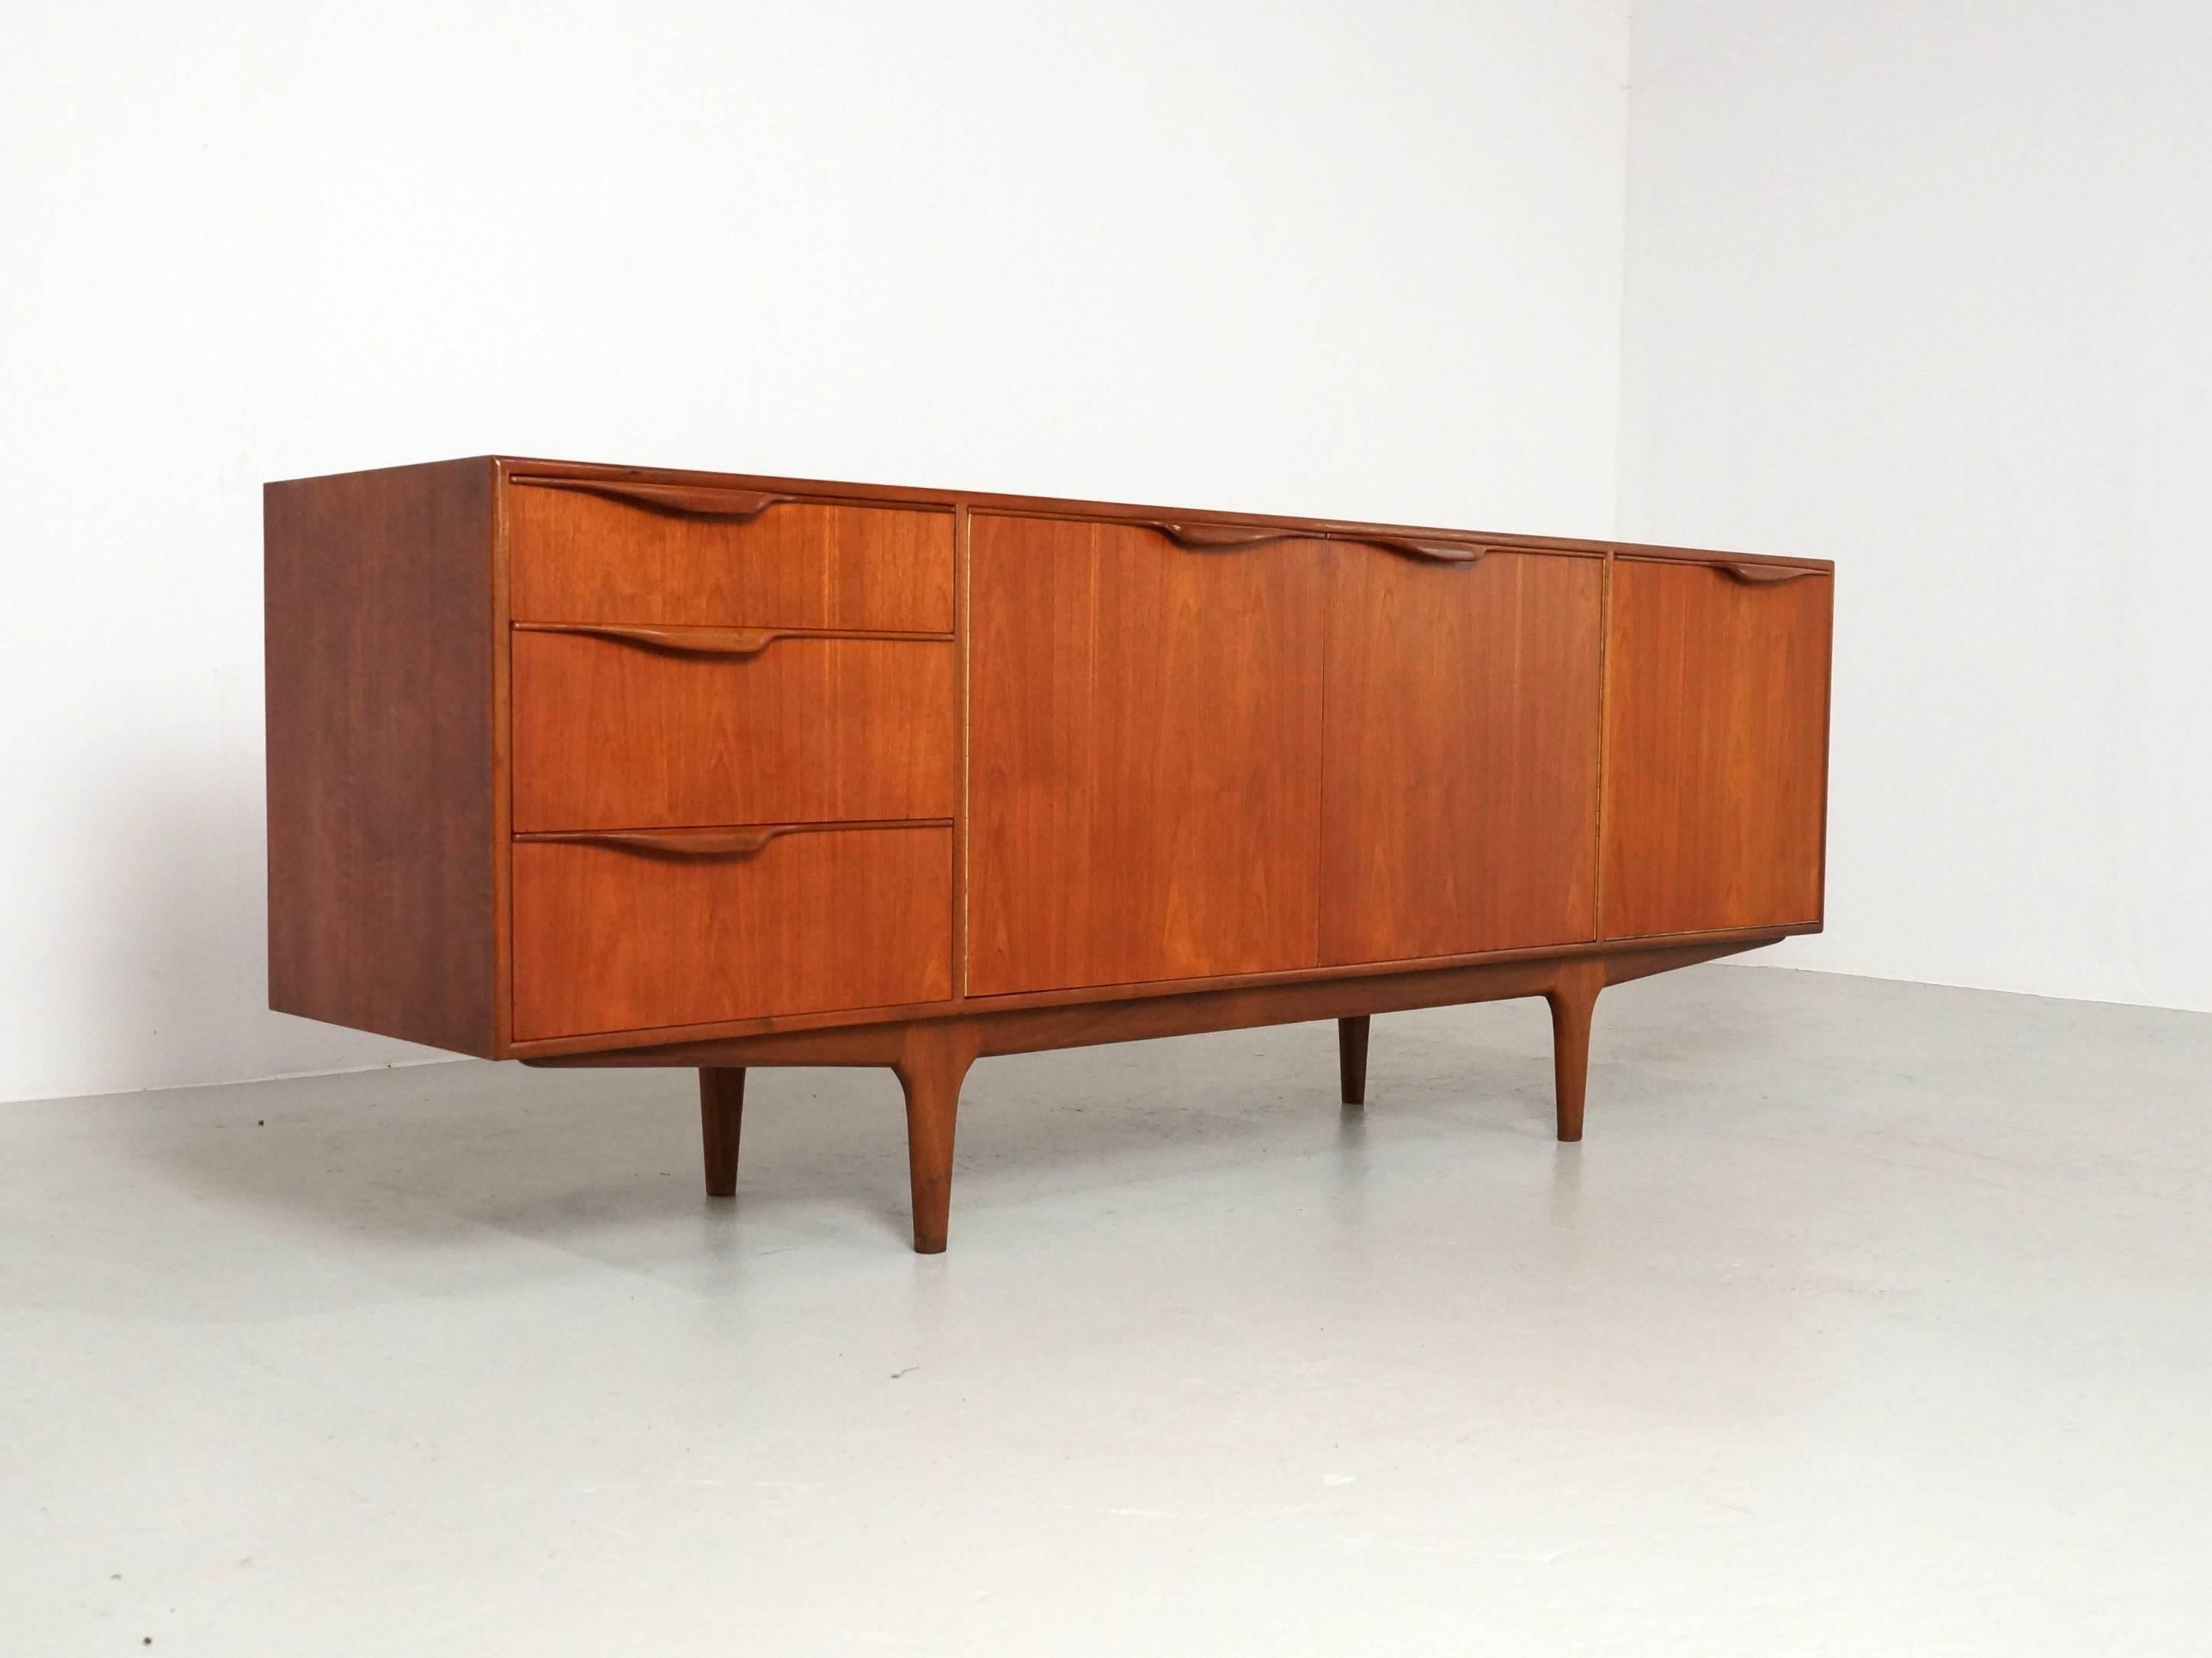 A beautifully designed and crafted teak 'Dunvegan' sideboard designed by Tom Robertson and manufactured by A.H. McIntosh of Kirkaldy, Scotland in the 1960s. 
This McIntosh sideboard in warm teak features beautiful carved handles which gives this